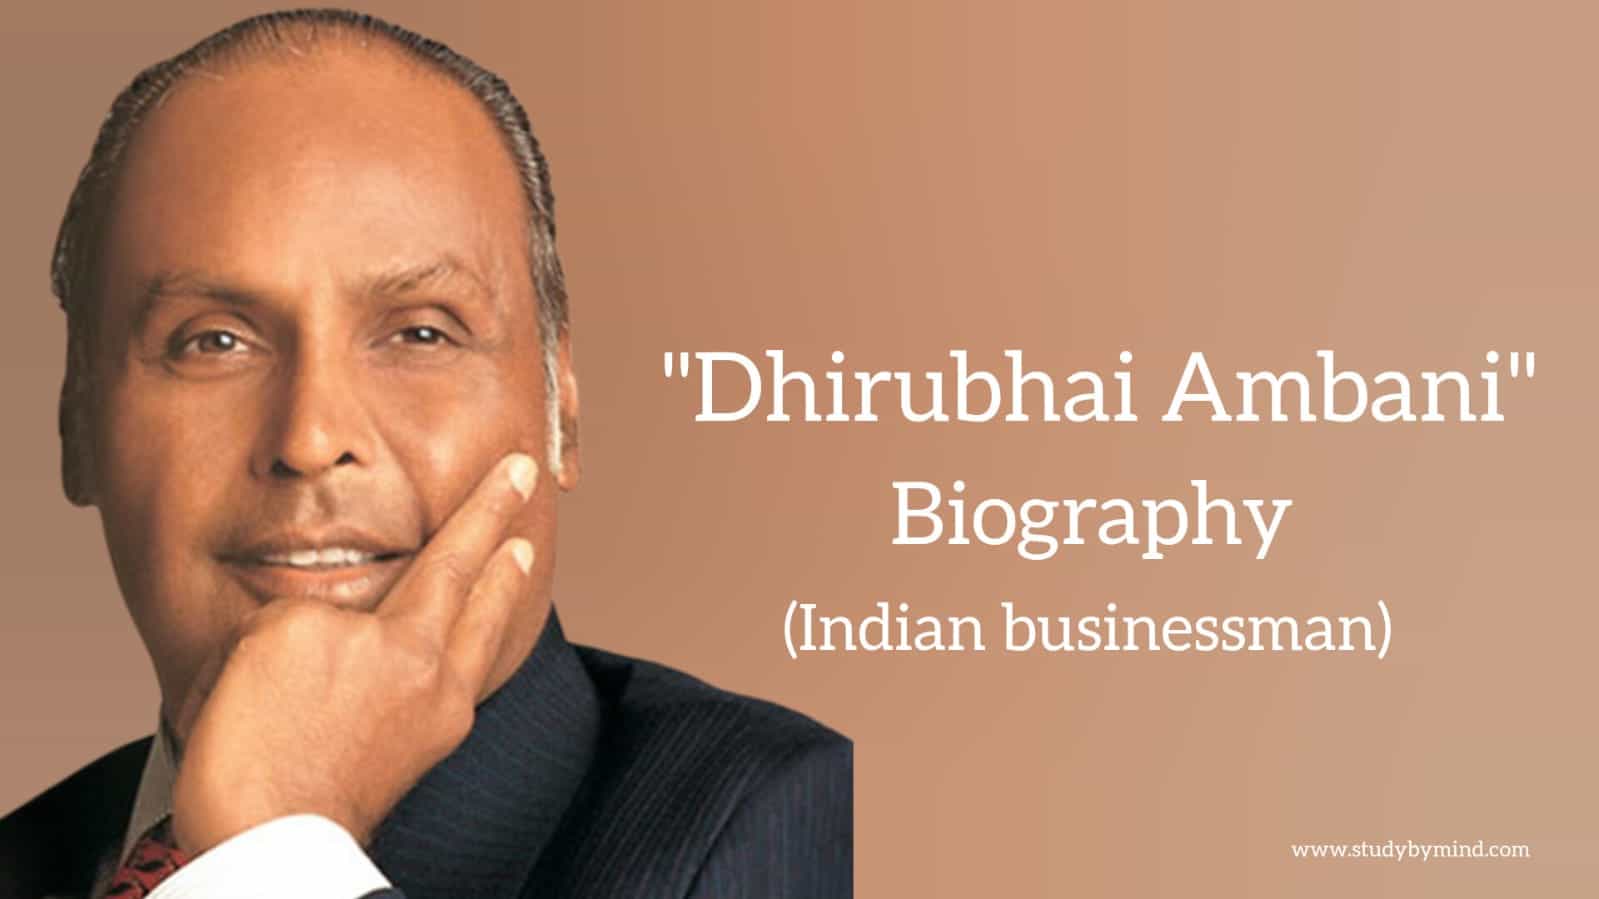 You are currently viewing Dhirubhai ambani biography in english (Indian Businessman)